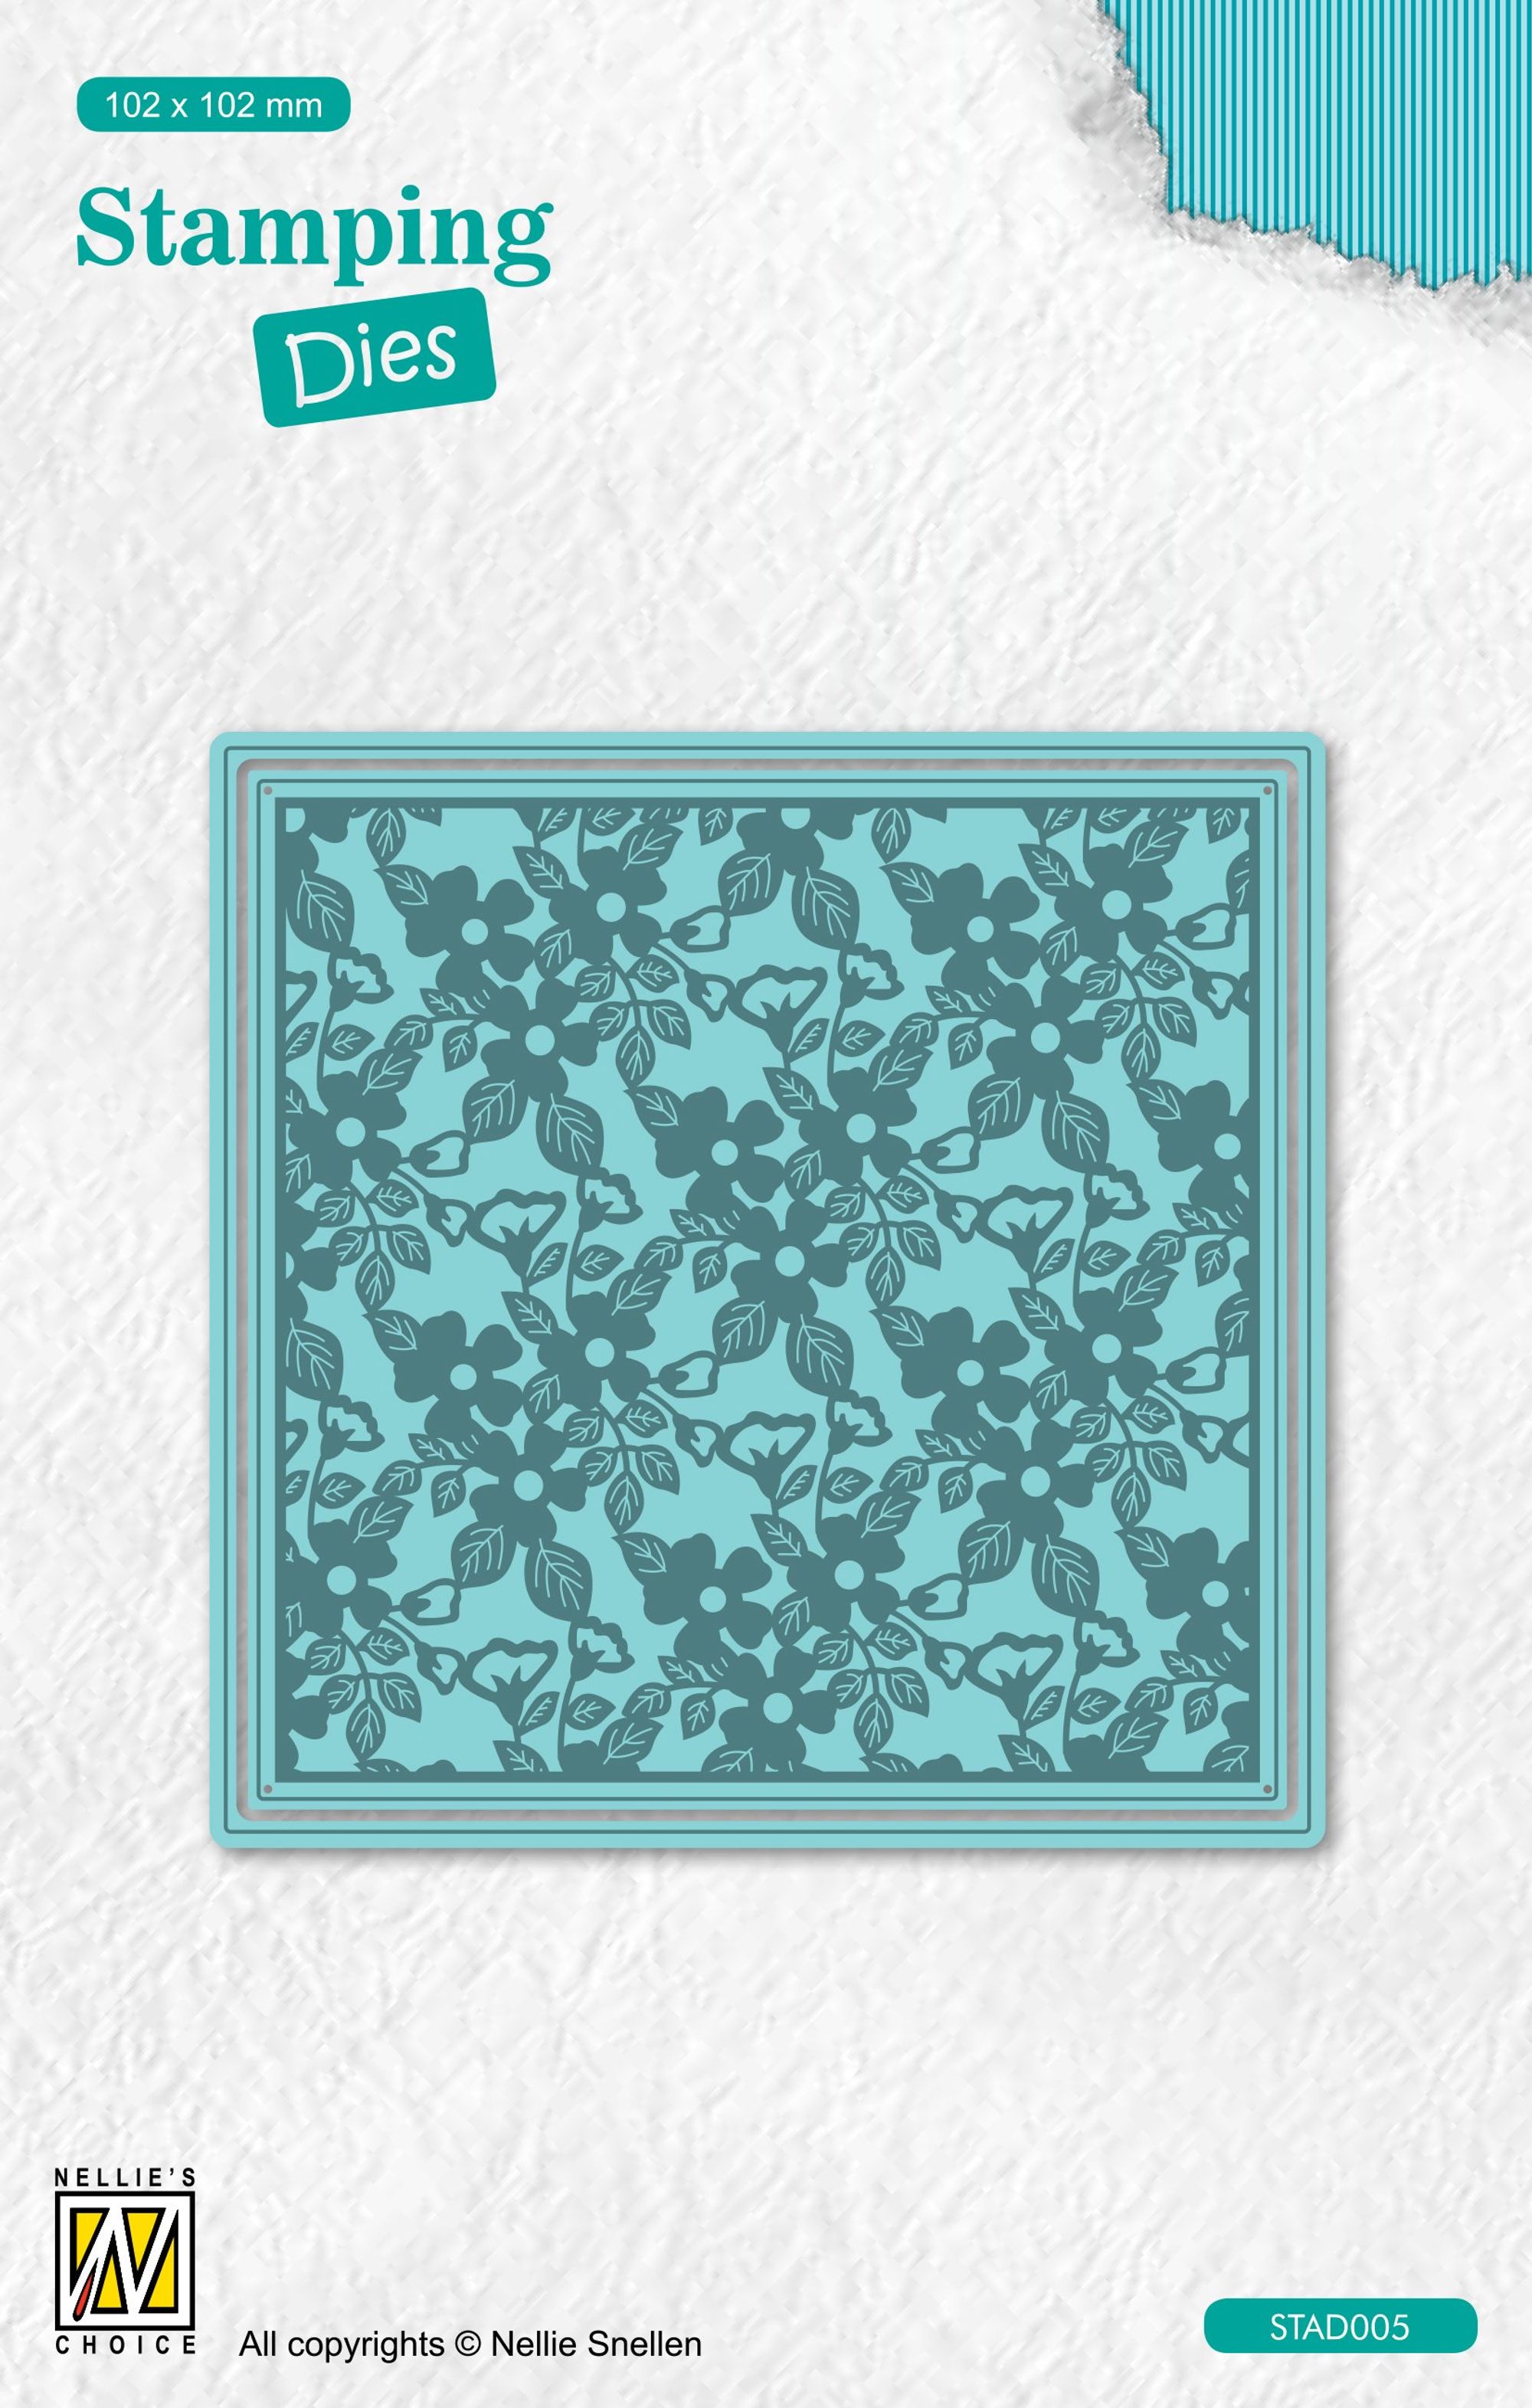 Nellie's Choice Stamping Die Square - Flowers